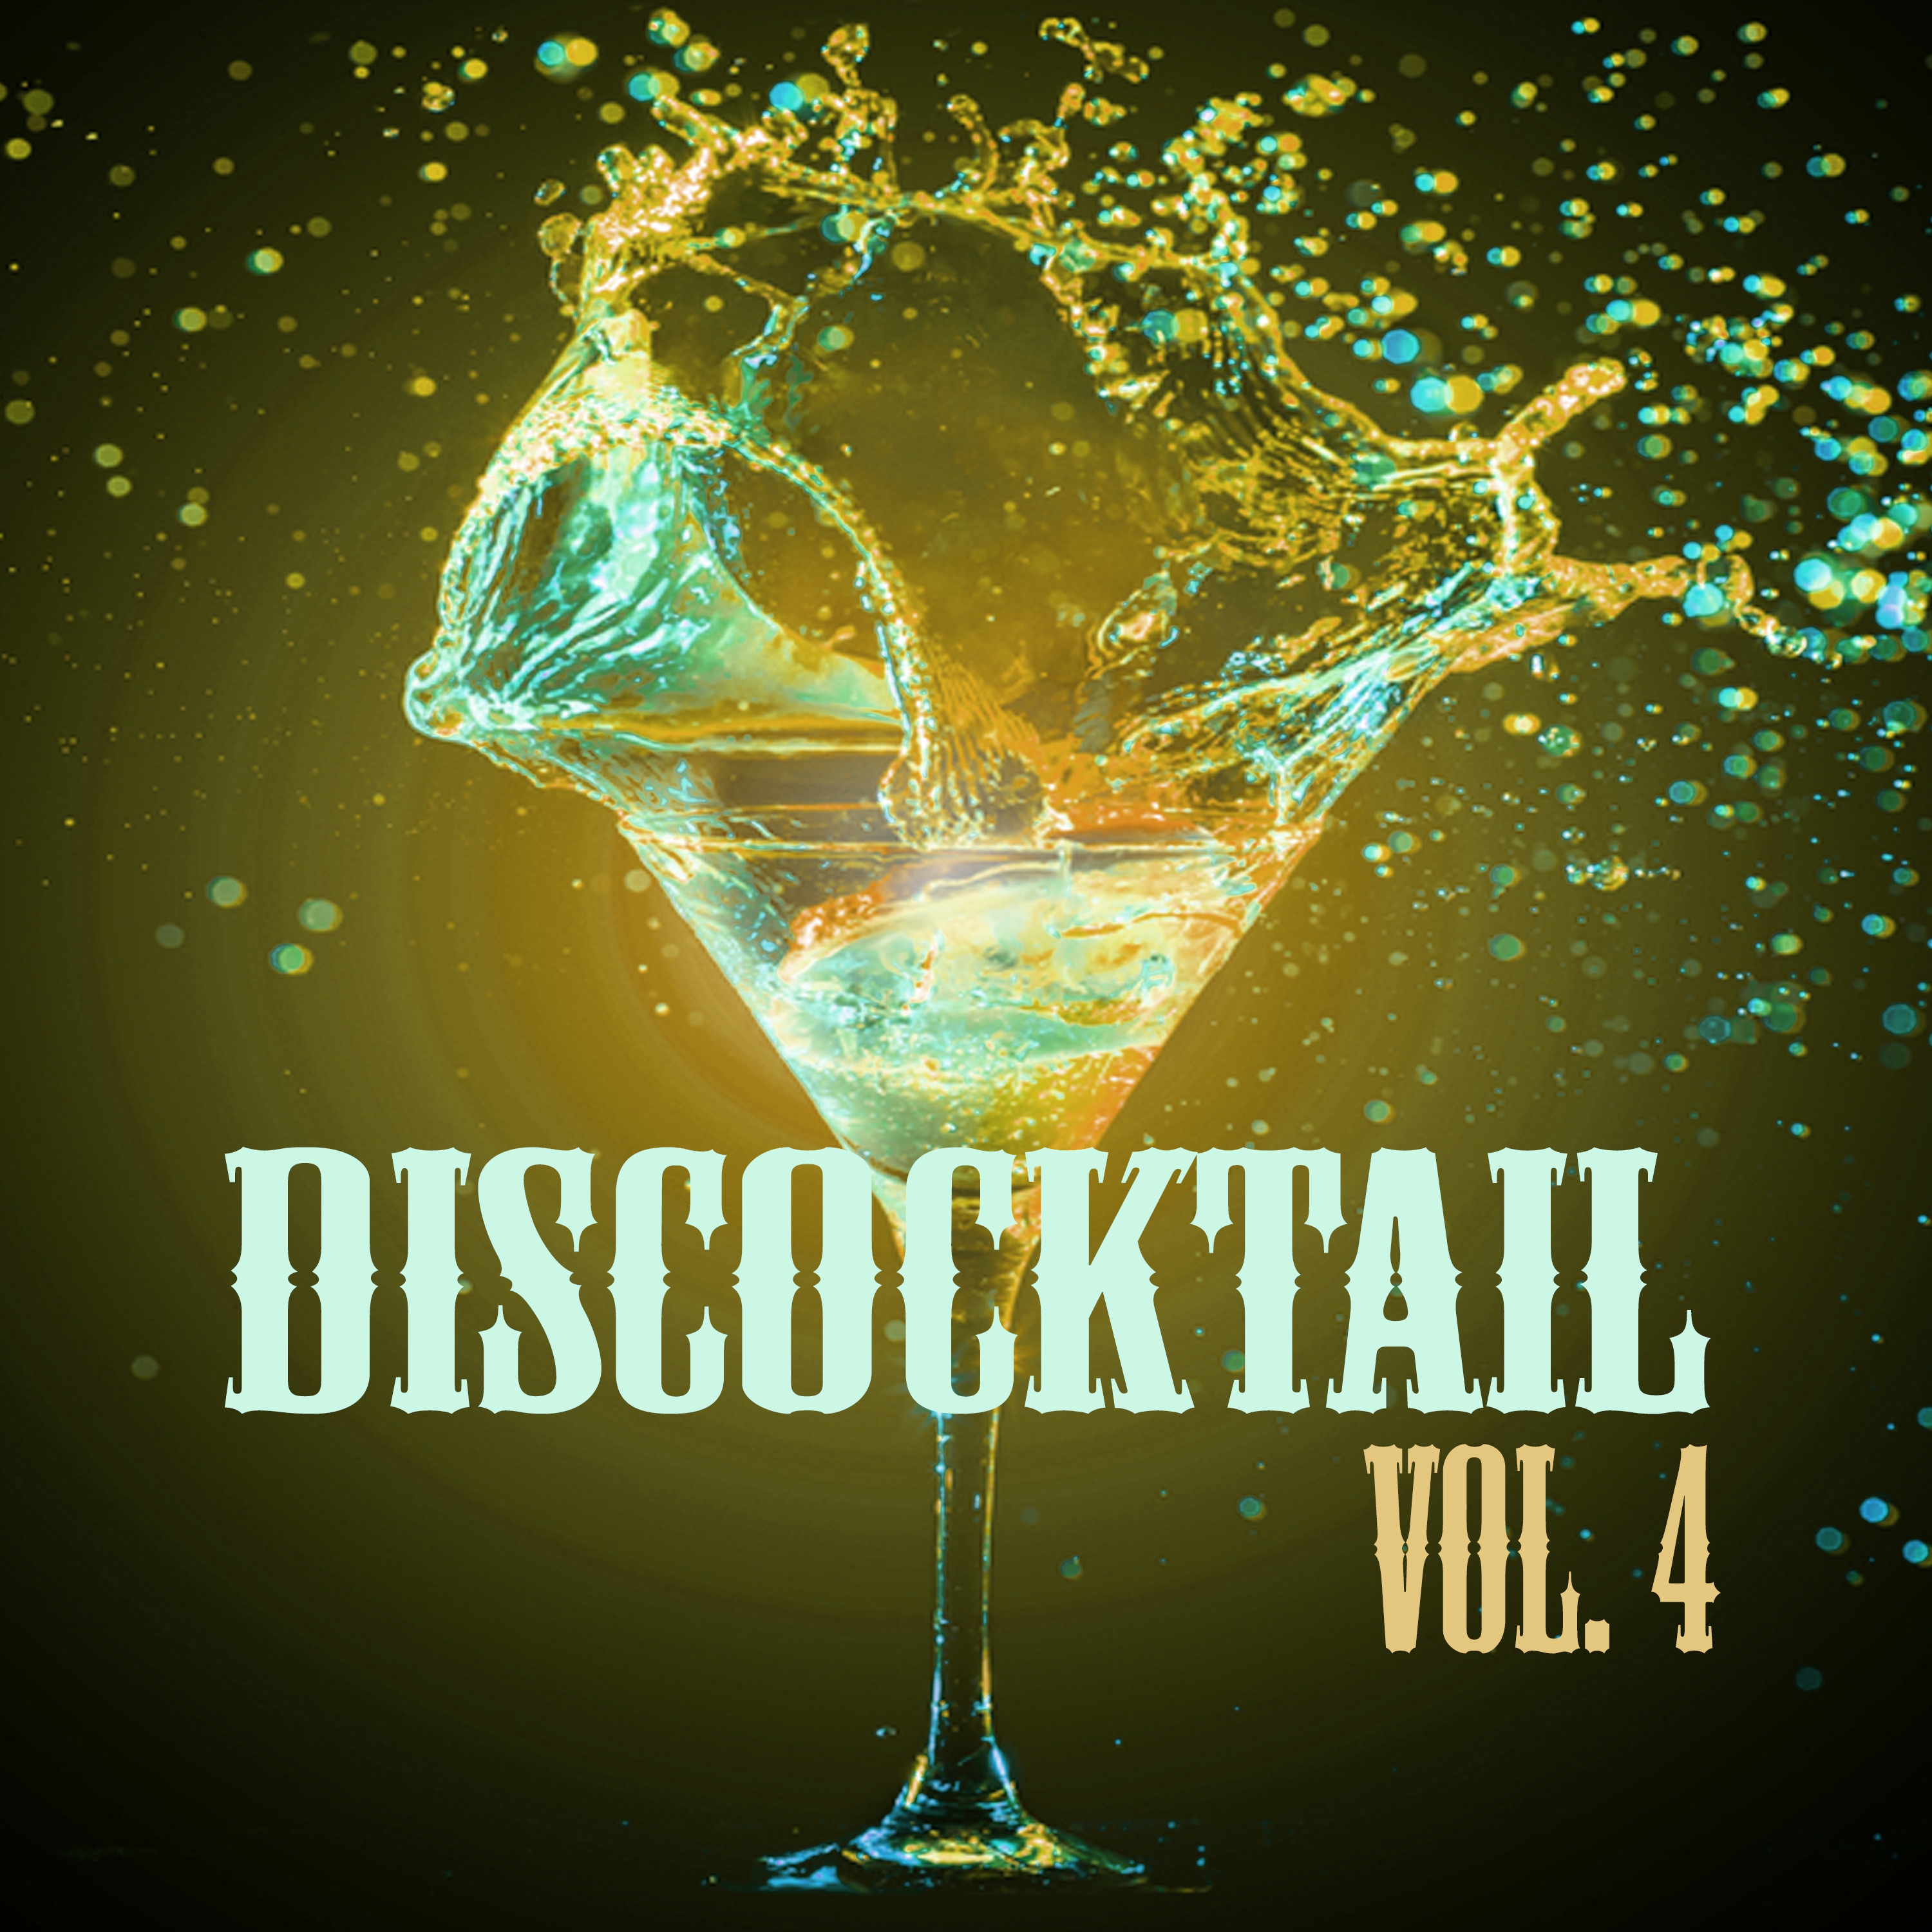 Discocktail, Vol. 4 - Best of Disco